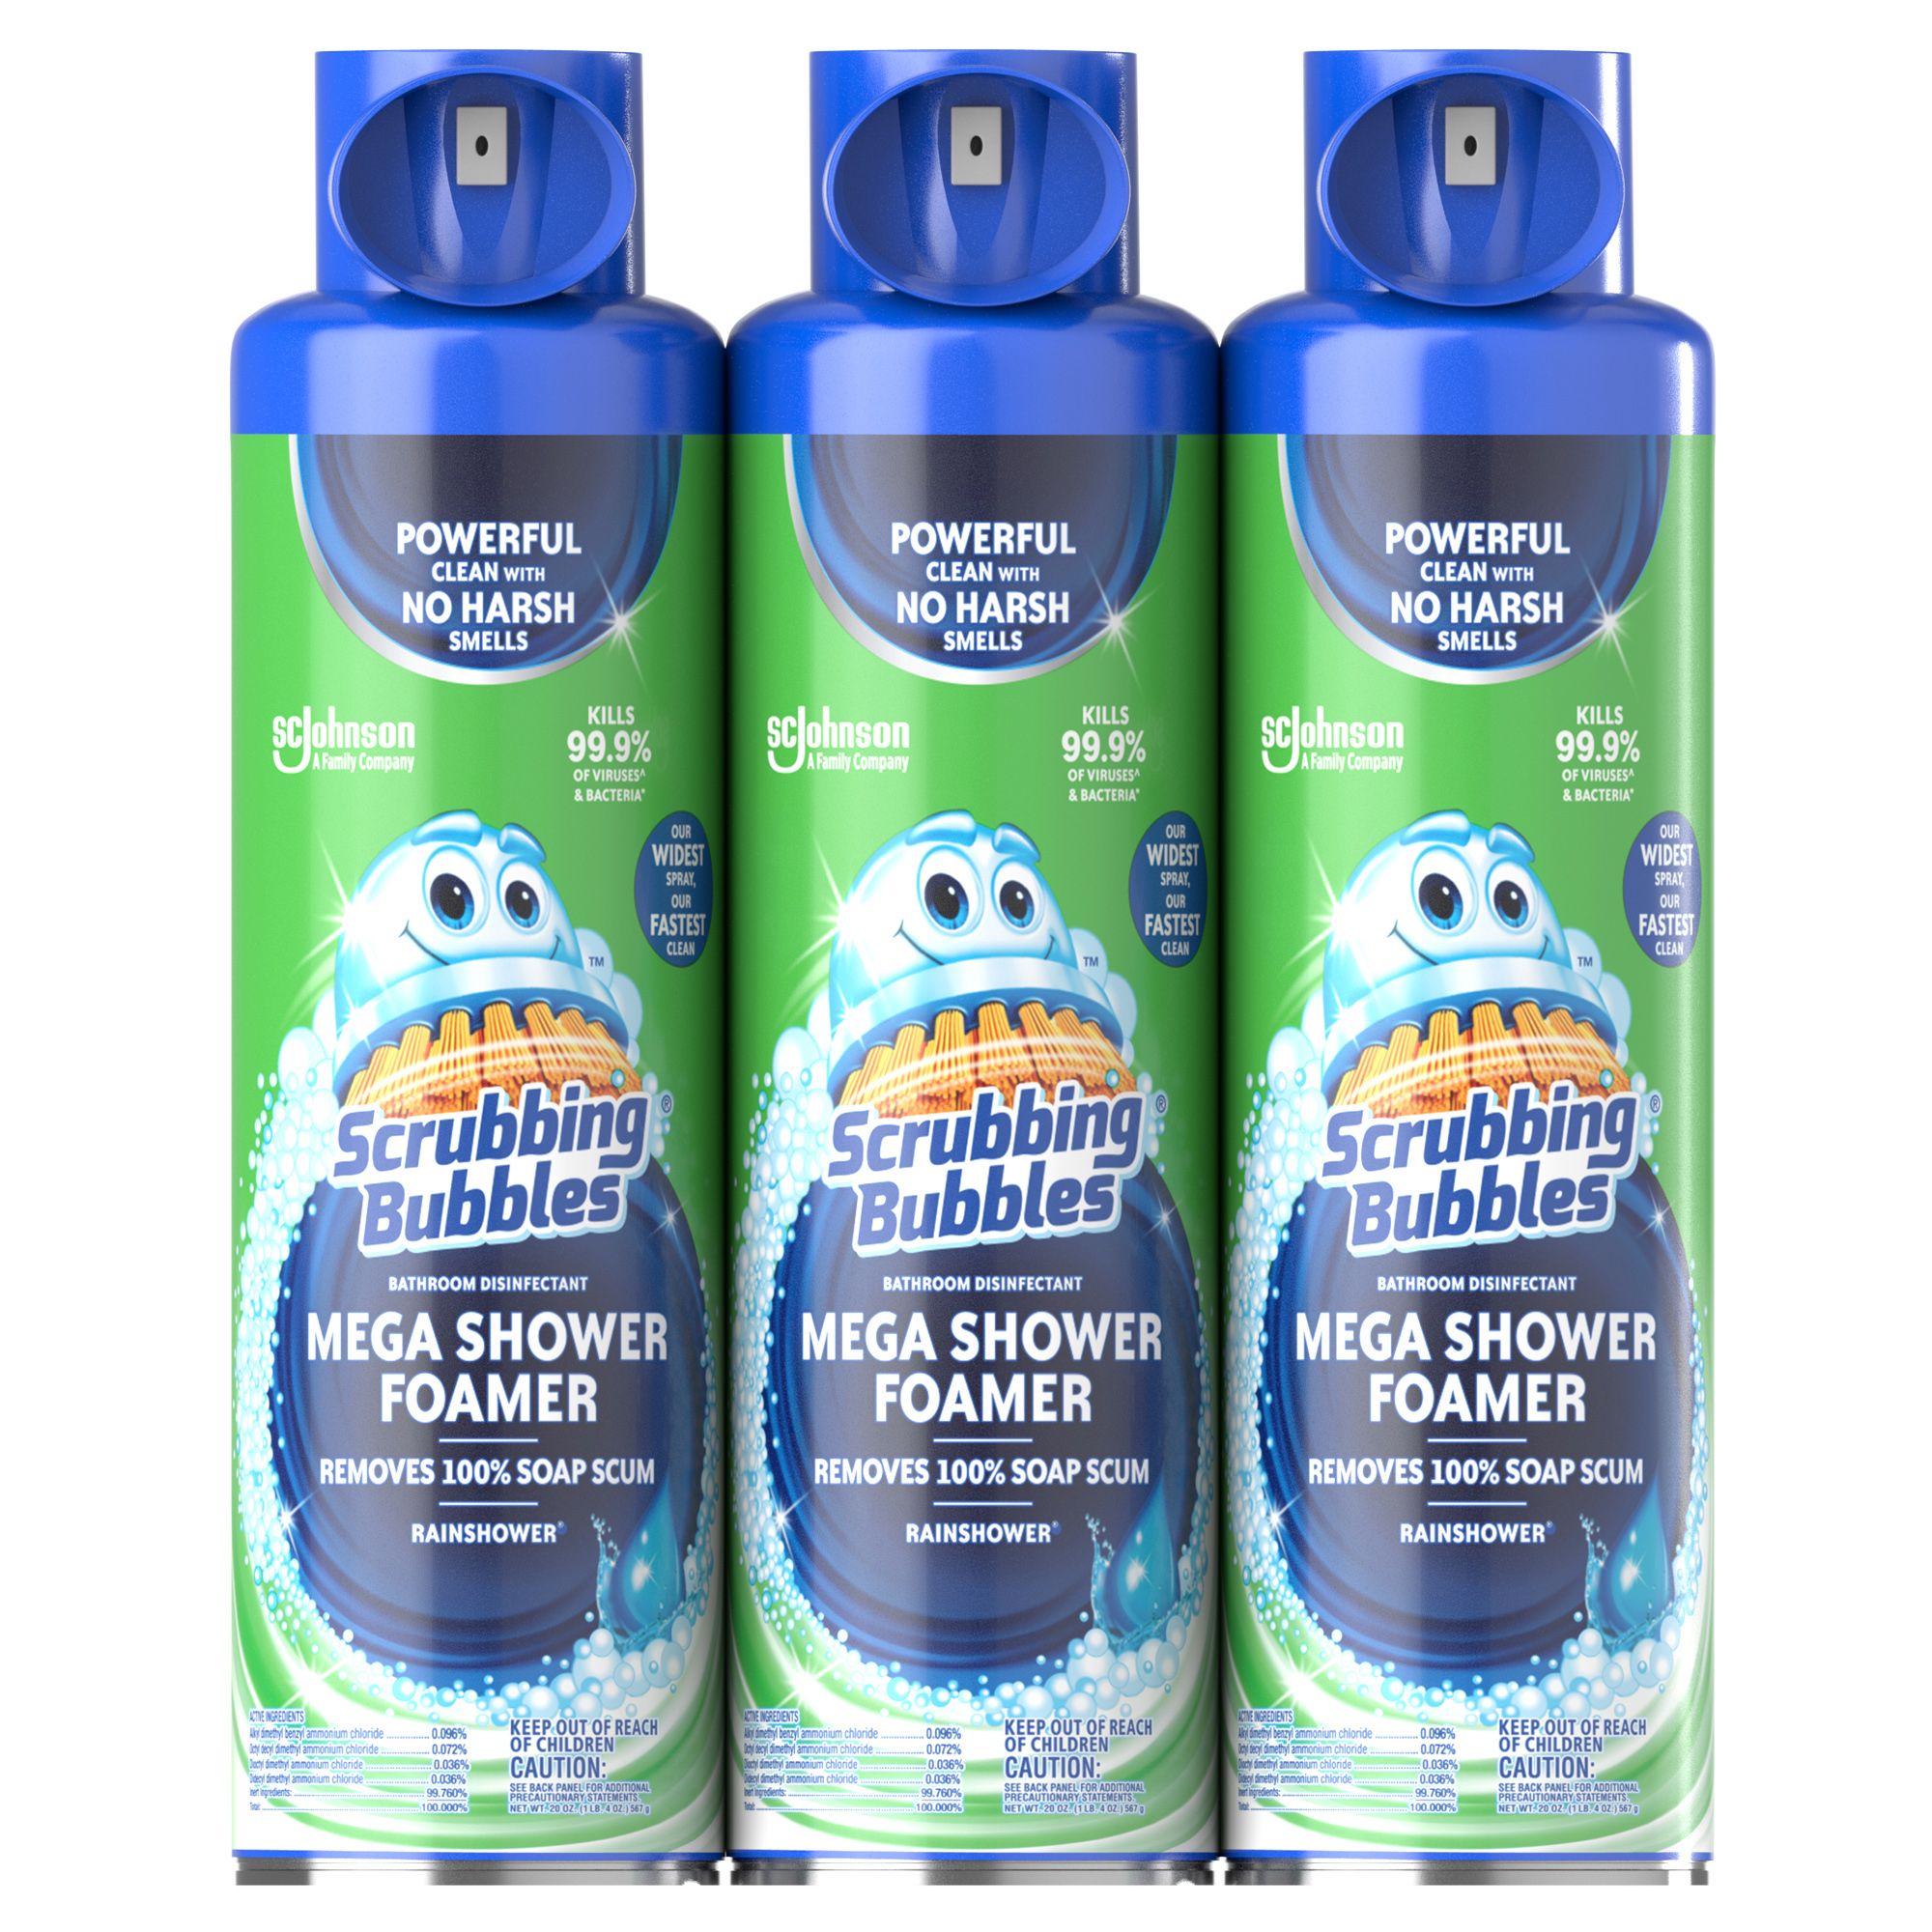 Bubble Cleaner  Best Foam Cleaner Store - Bubble Cleaner